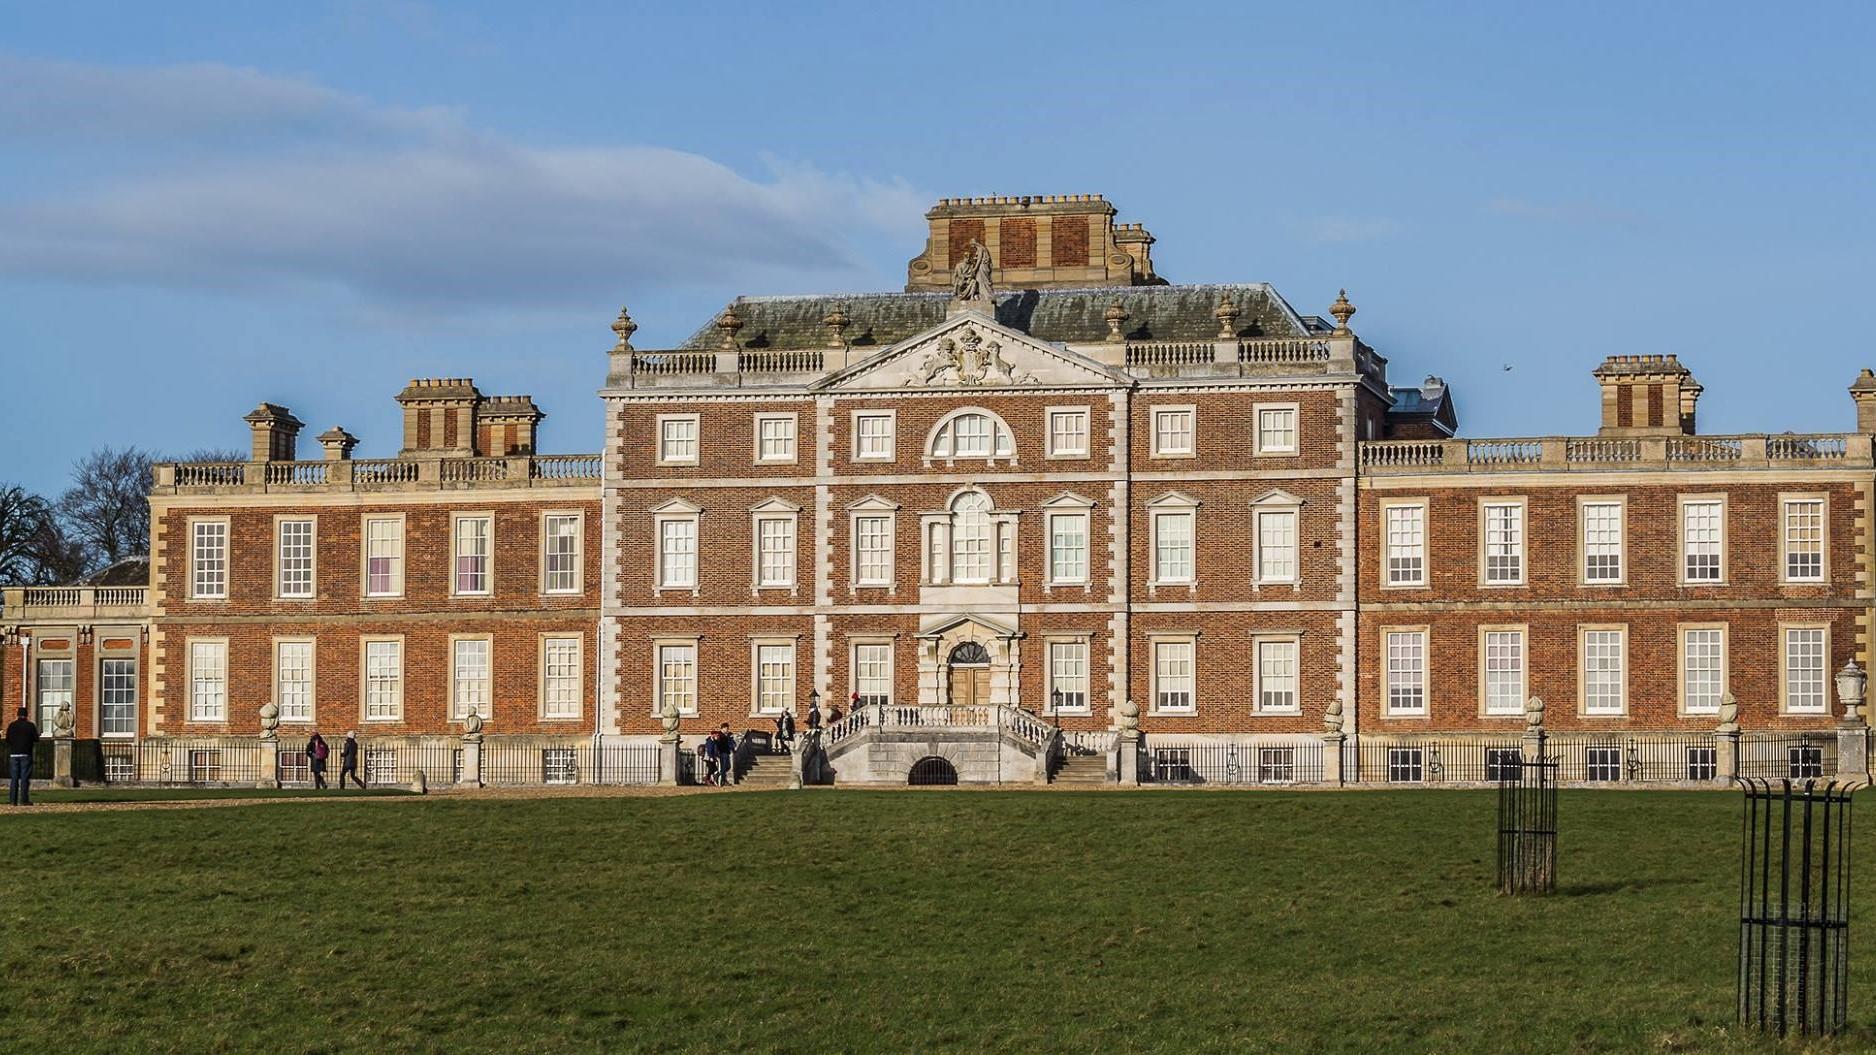 A landscape picture of Wimpole Hall